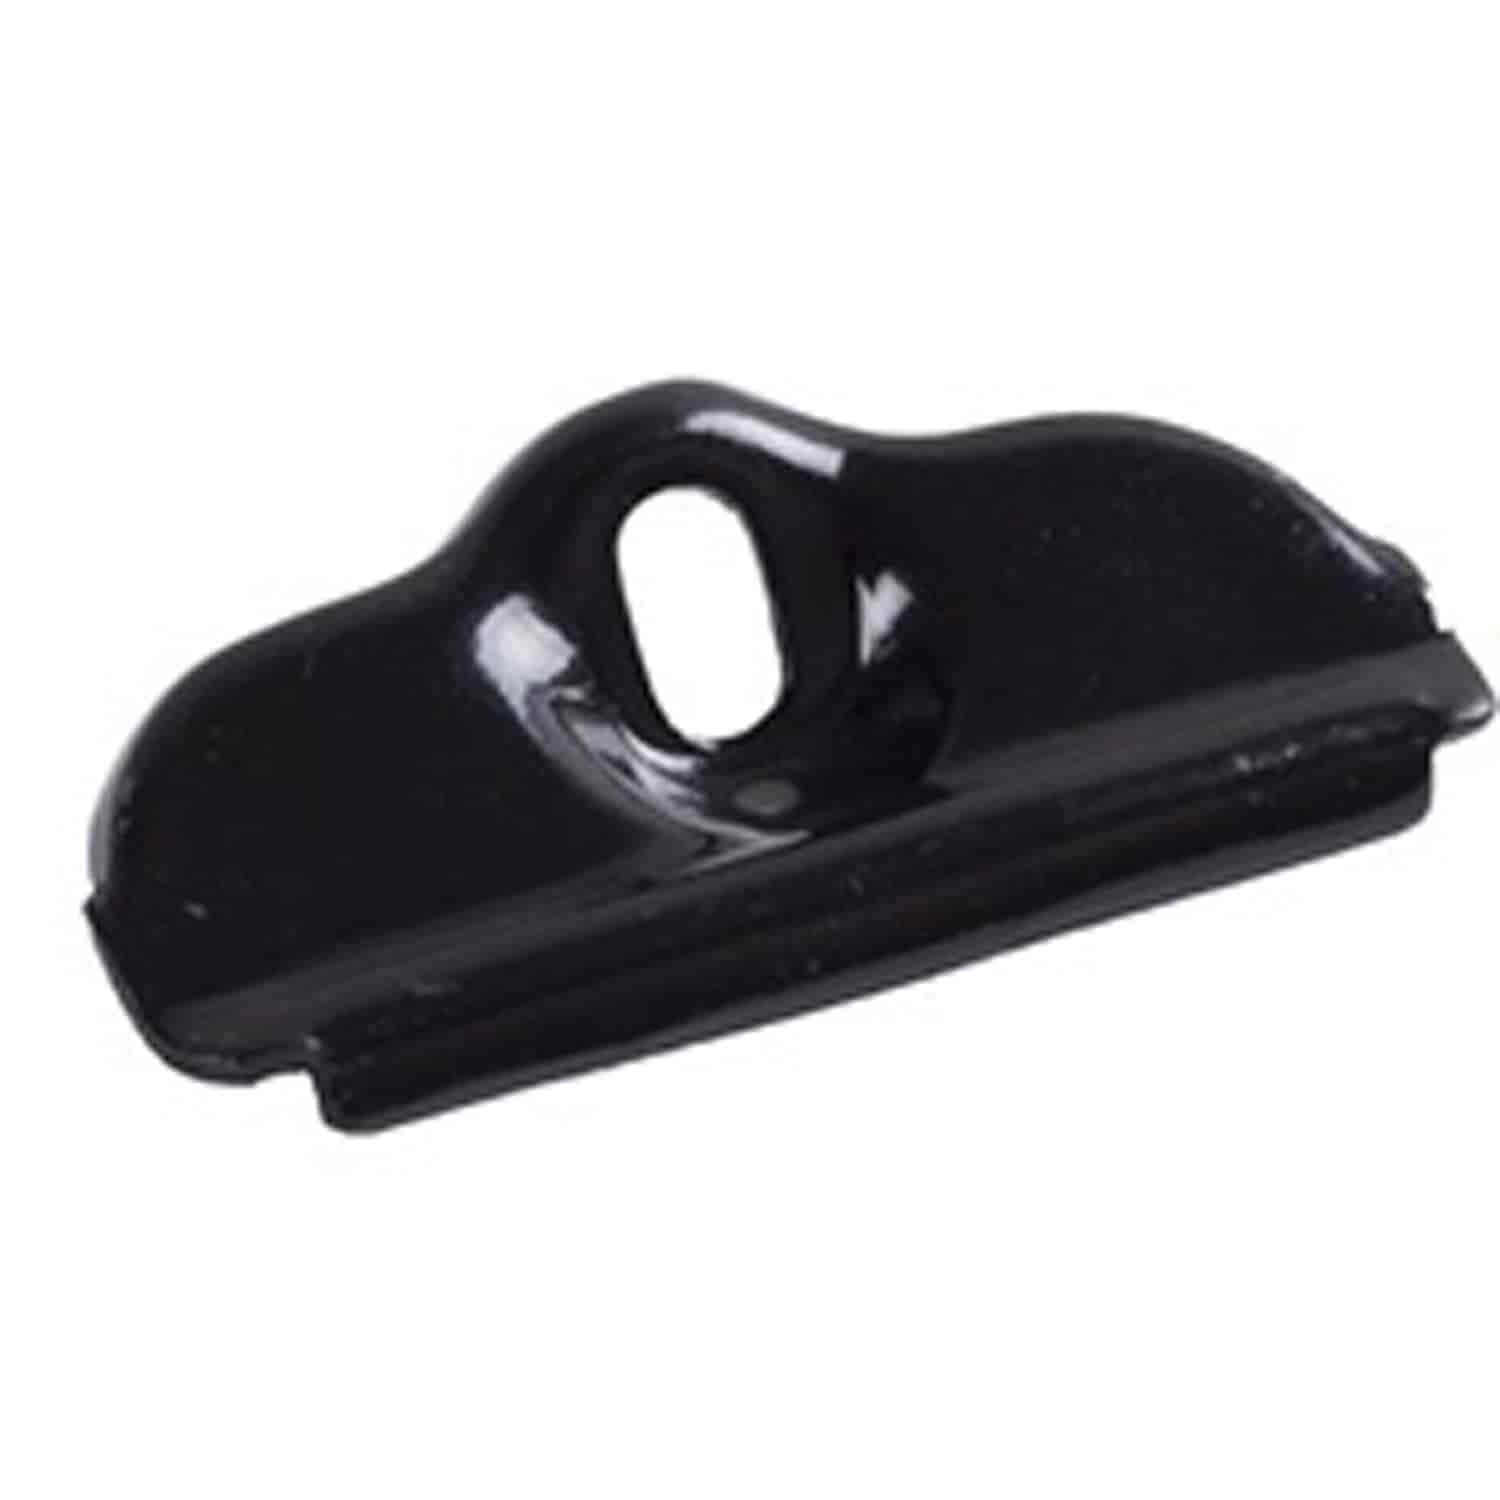 This black battery clamp from Omix-ADA is universal and works with J-hooks to secure your battery to the battery tray.